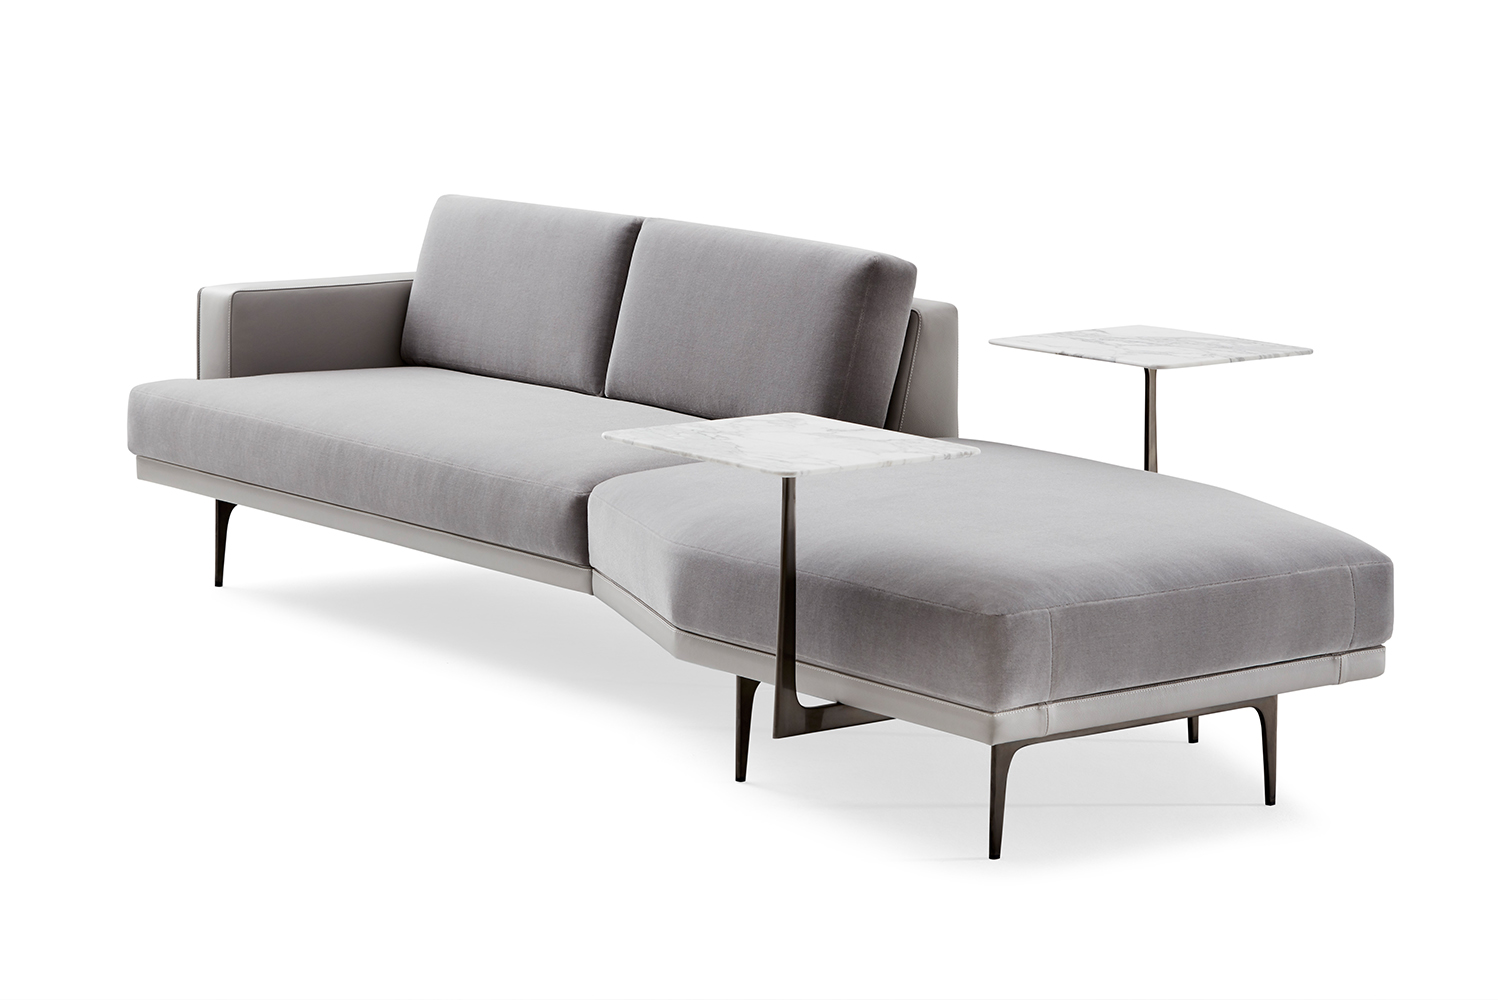 The Lyda sofa designed by Lauren Rottet is upholstered in a warm neutral mohair and gray leather and complemented by steel